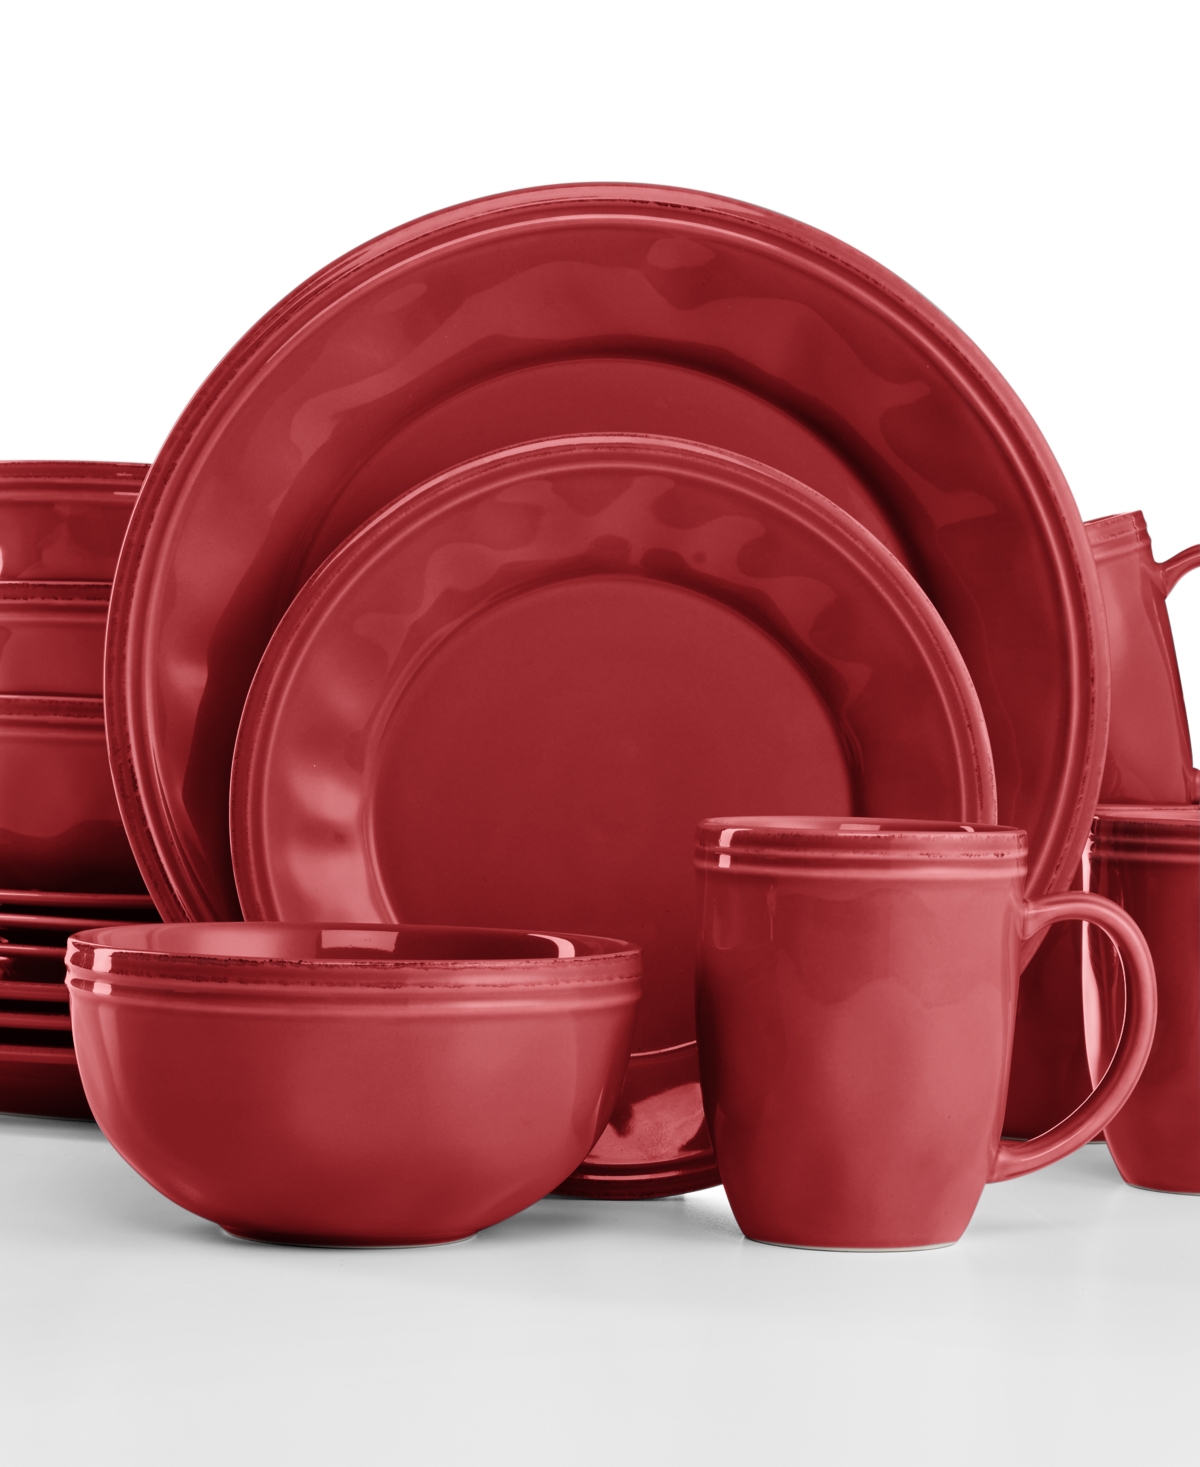 Cucina Agave Blue 16-Pc. Set, Service for 4 - Cranberry Red